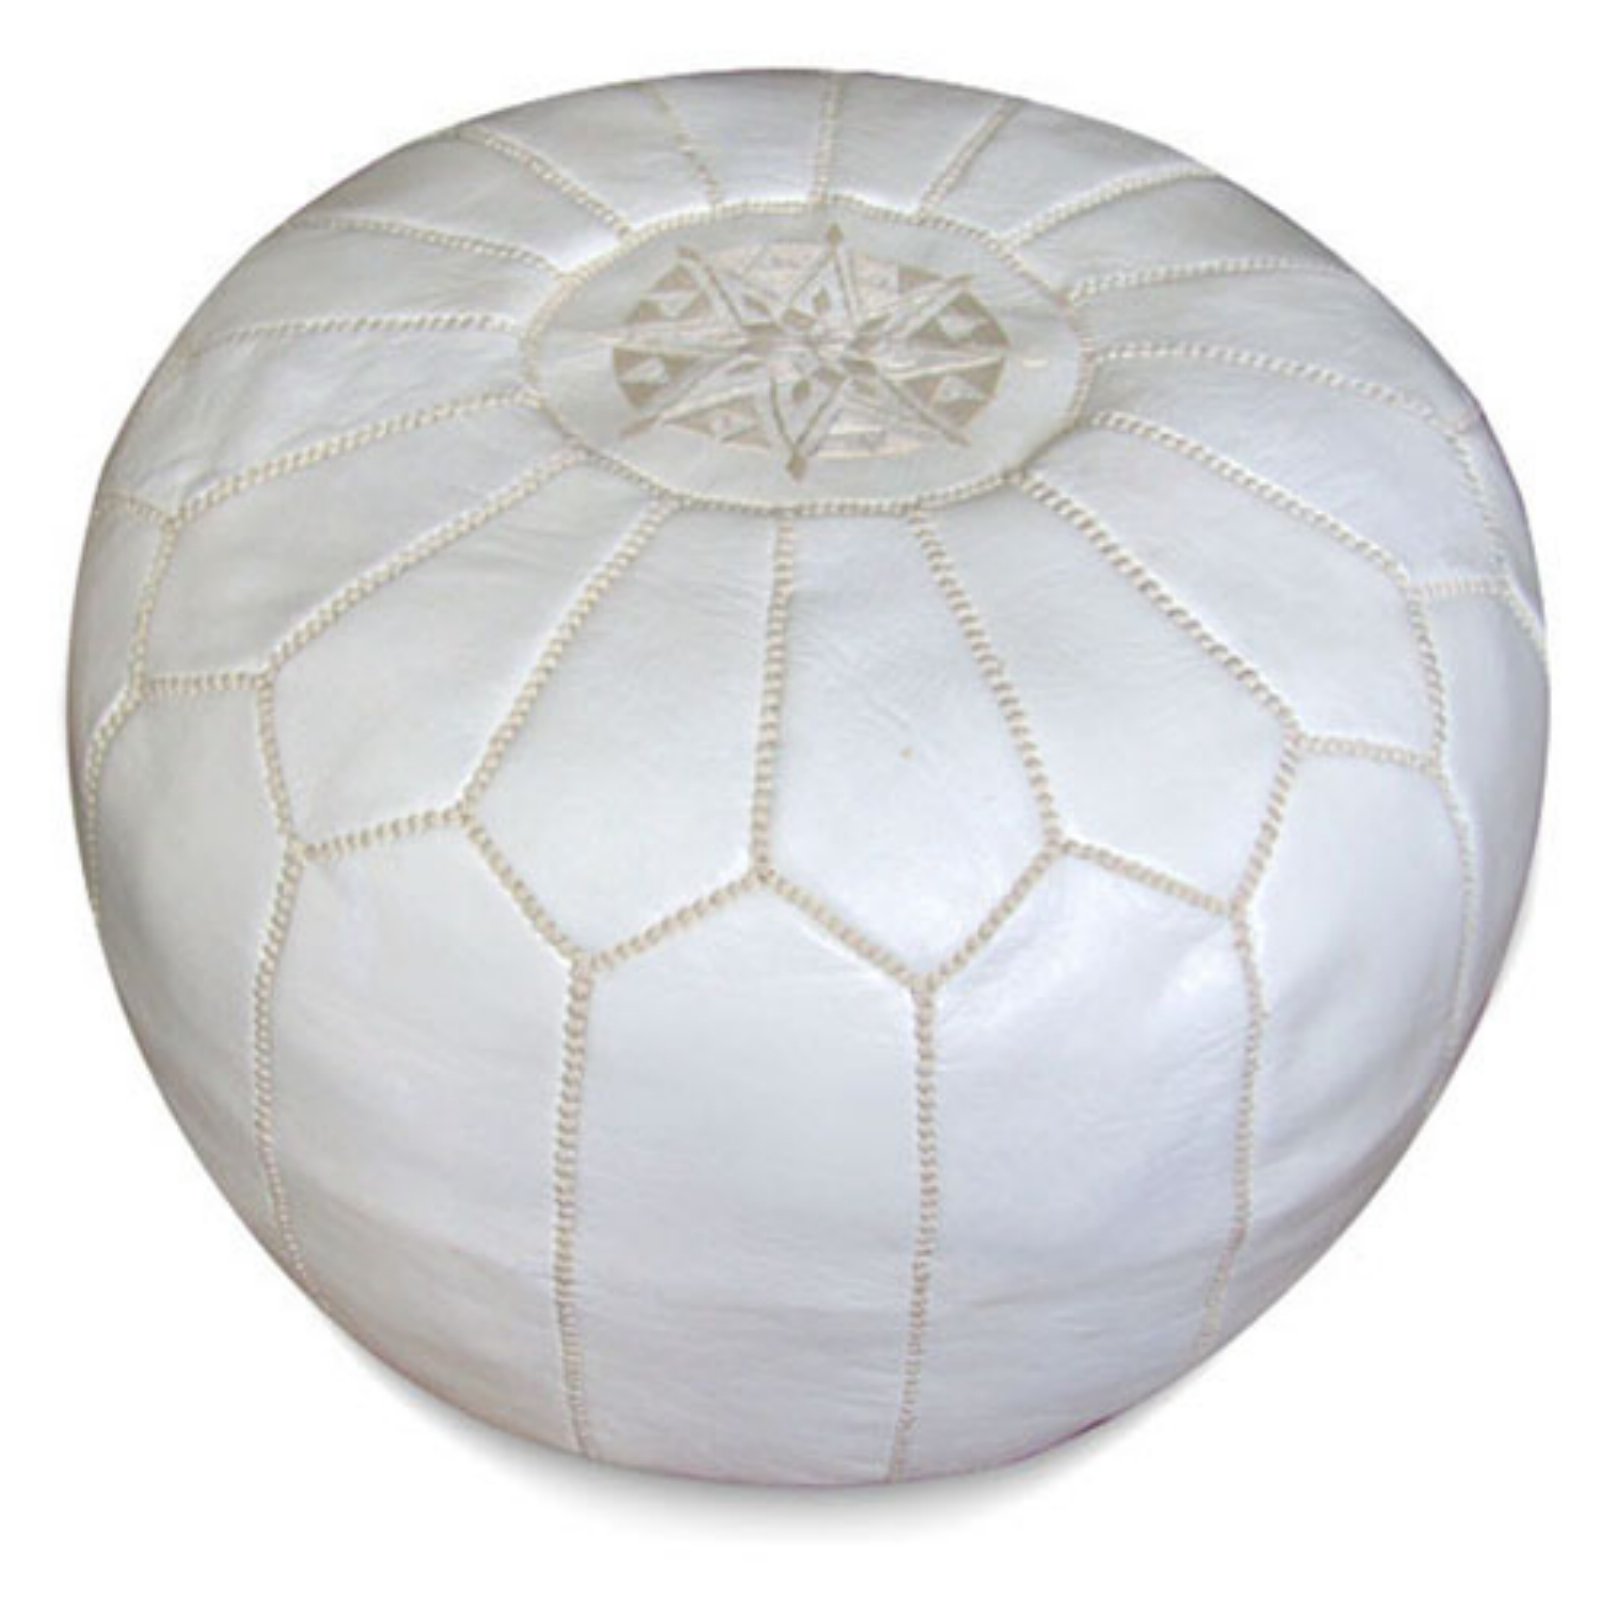 Ikram Design Round Moroccan Leather Pouf - image 2 of 4